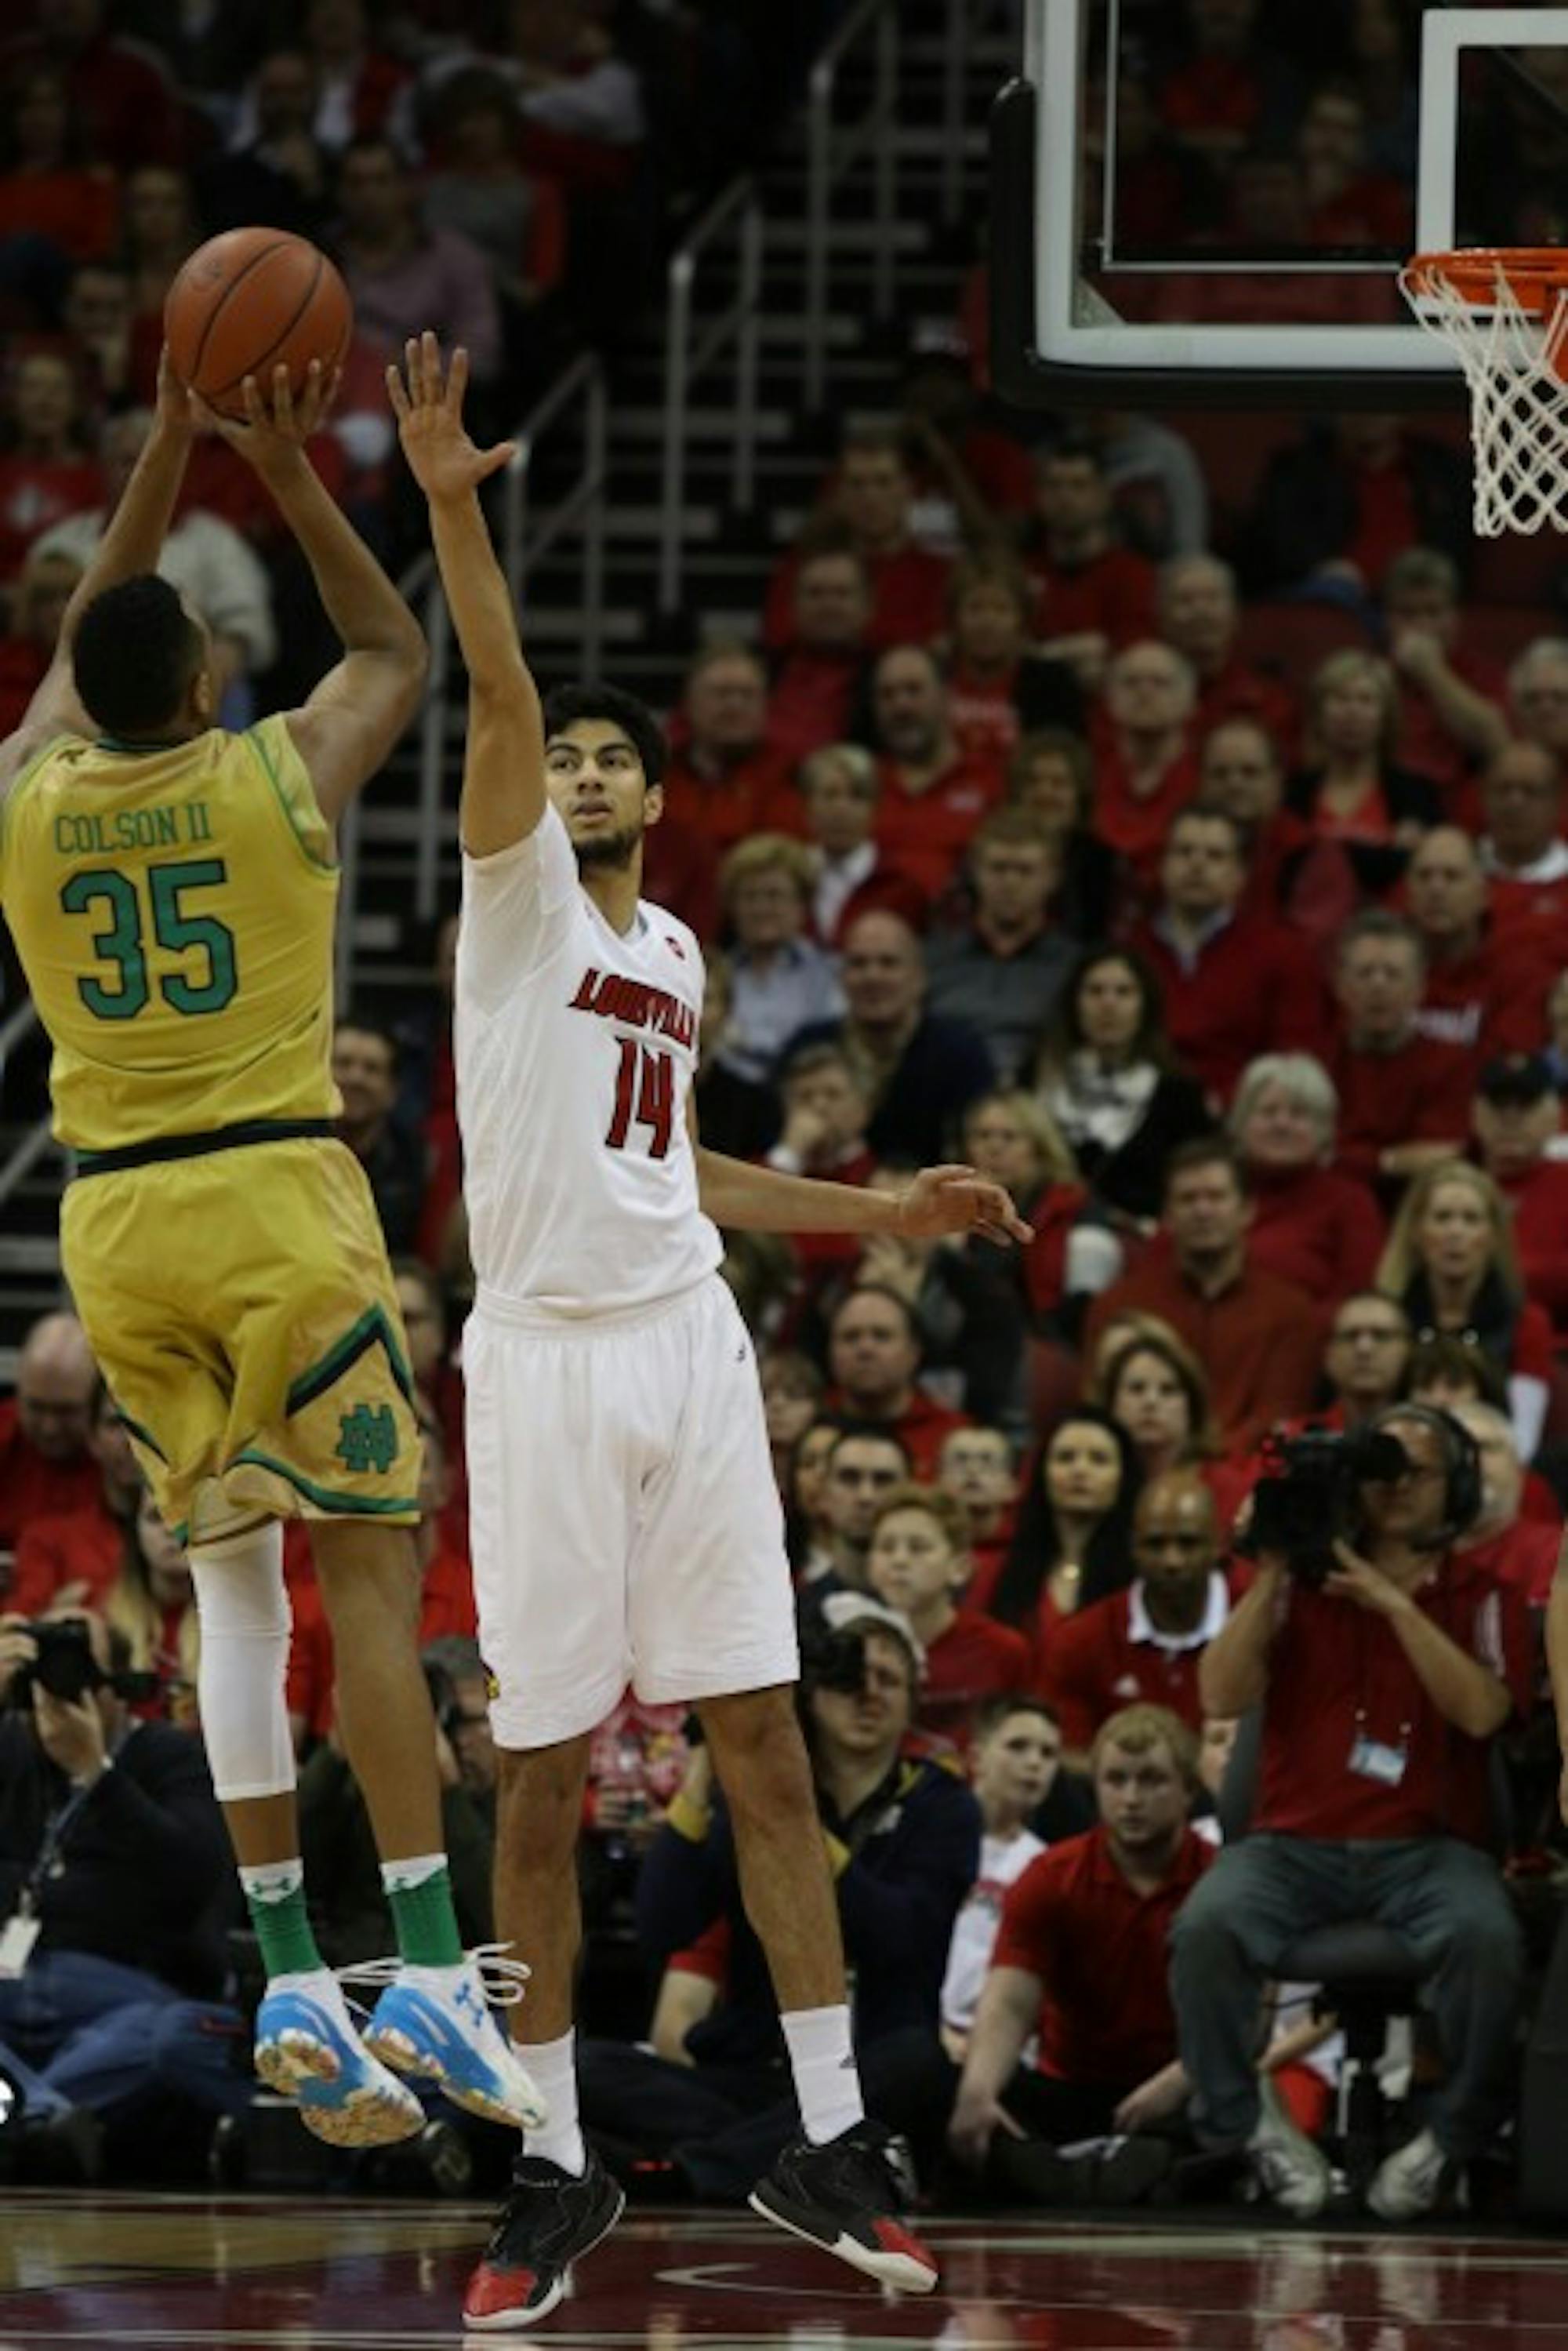 Irish junior forward pulls up for a jumper during Notre Dame’s 71-64 loss at Louisville on Saturday.